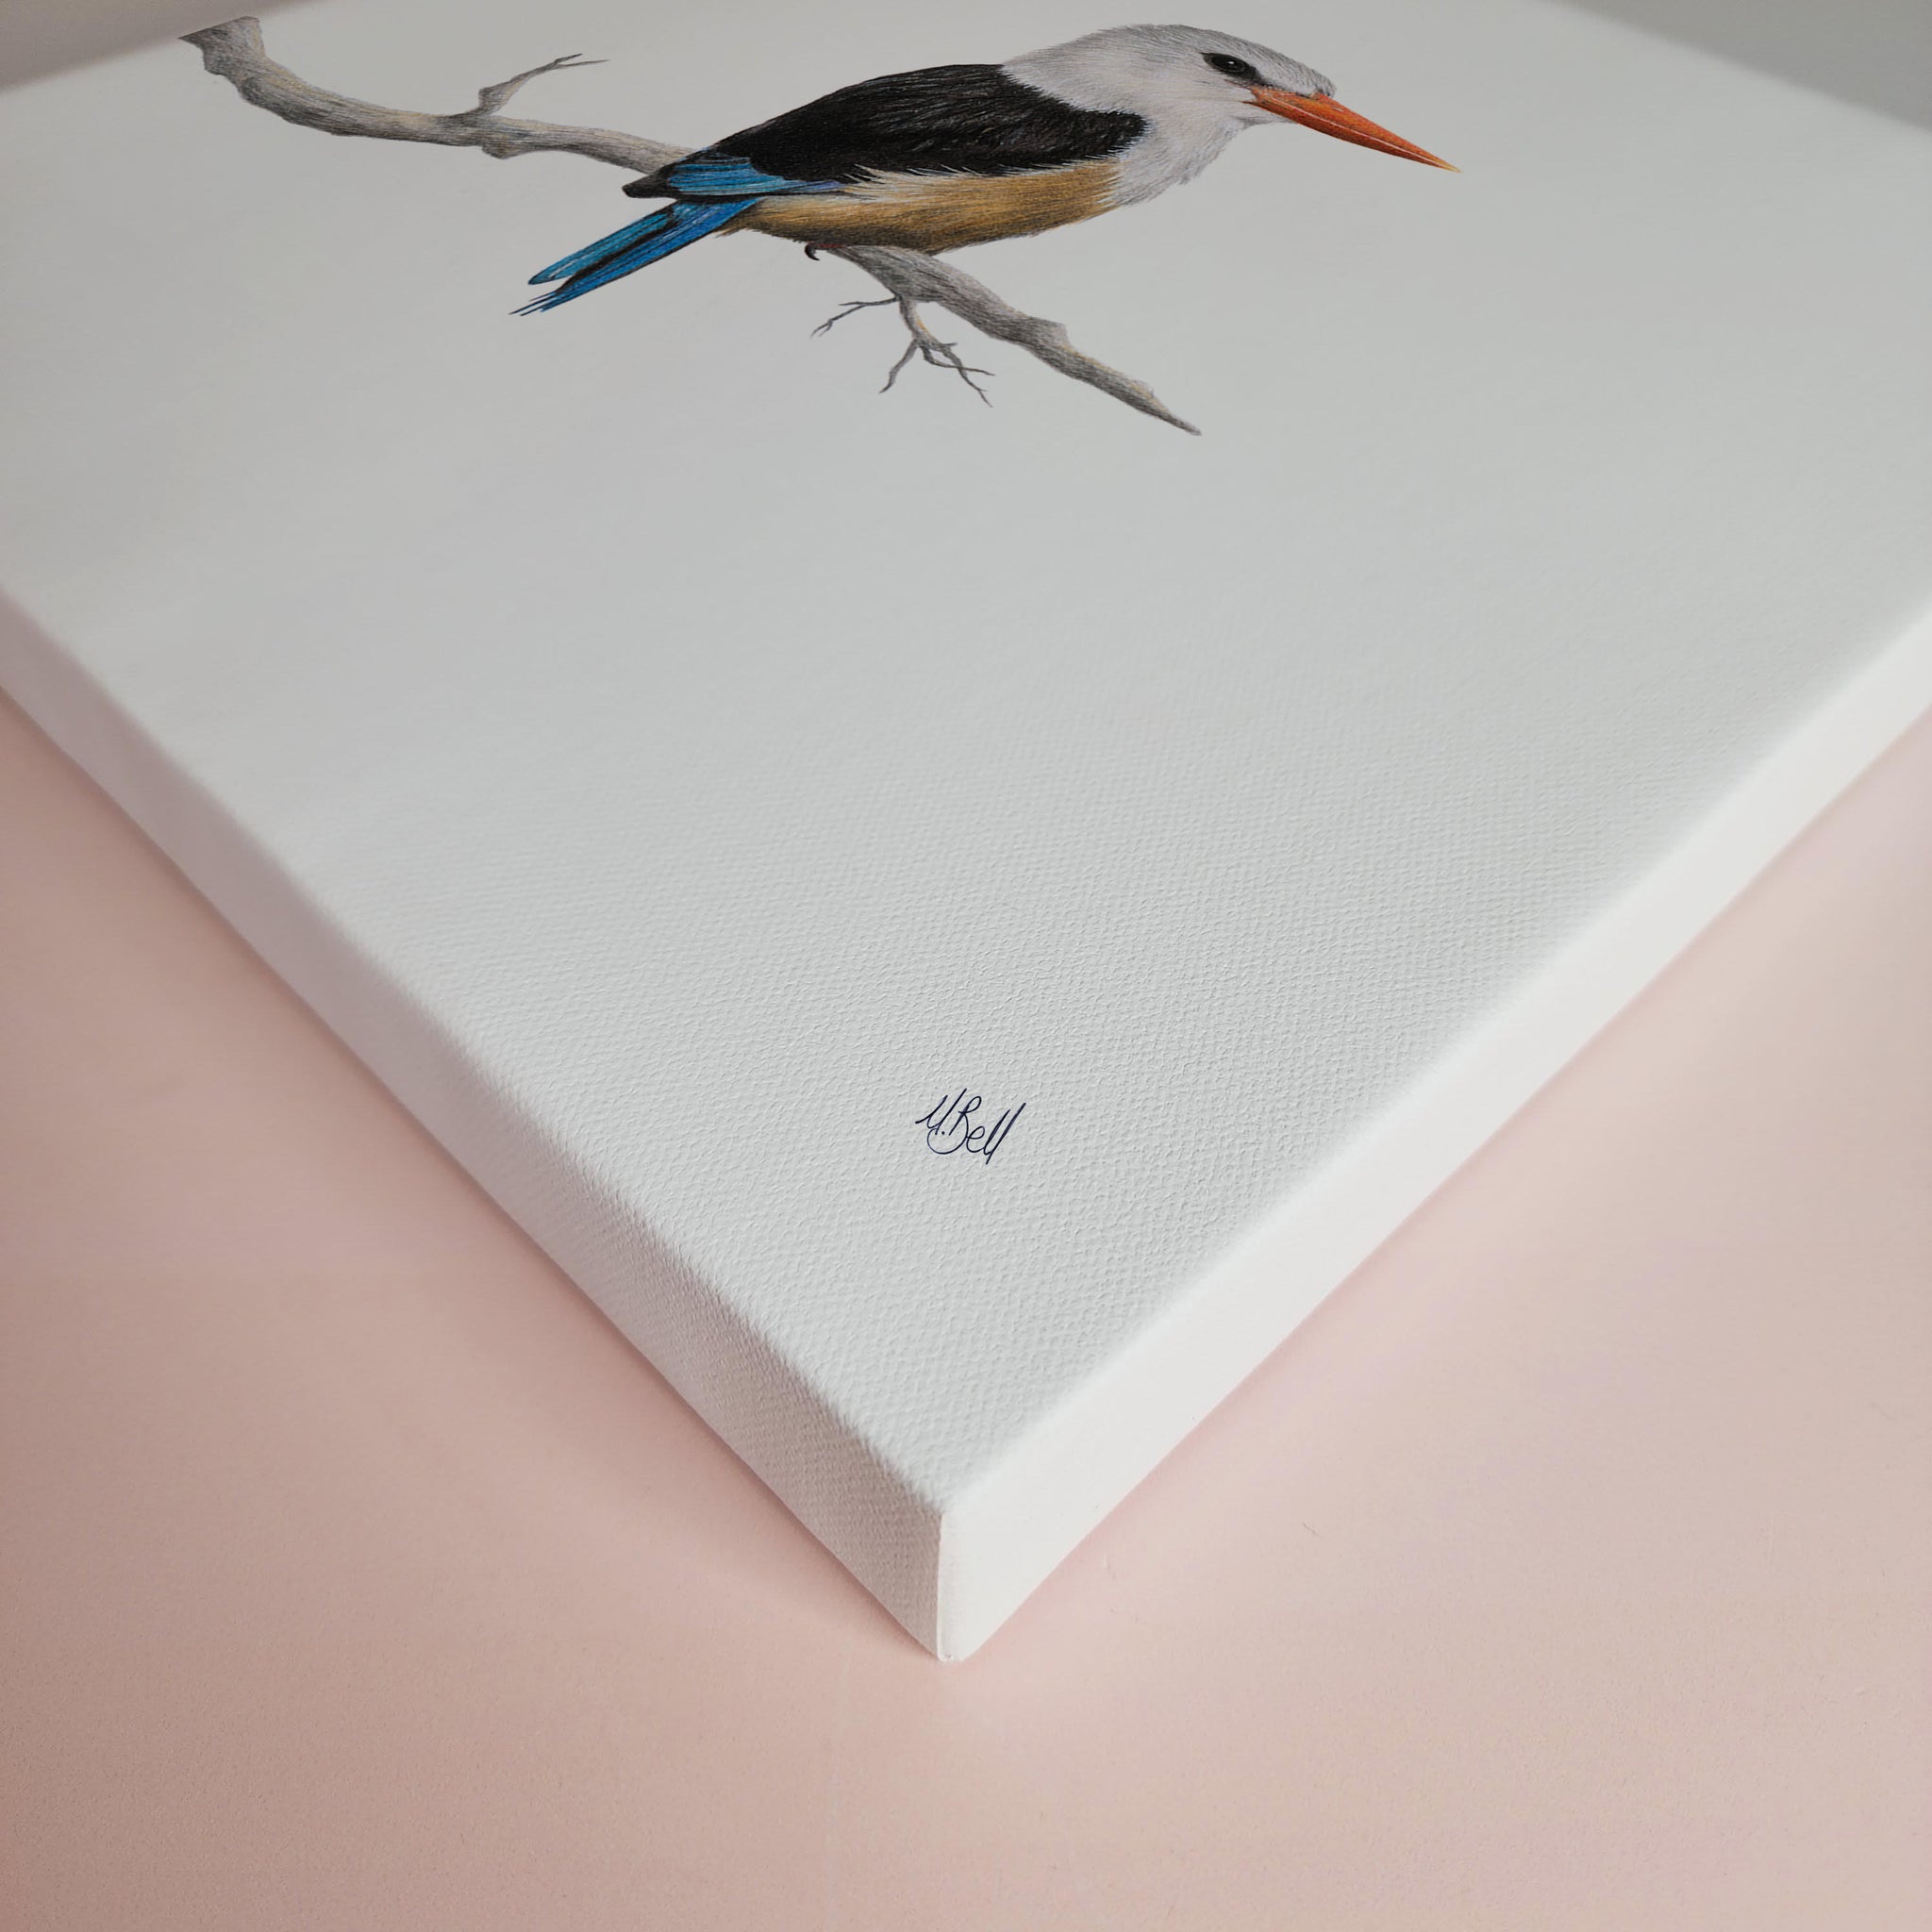 Grey Headed Kingfisher bird artwork on stretched canvas